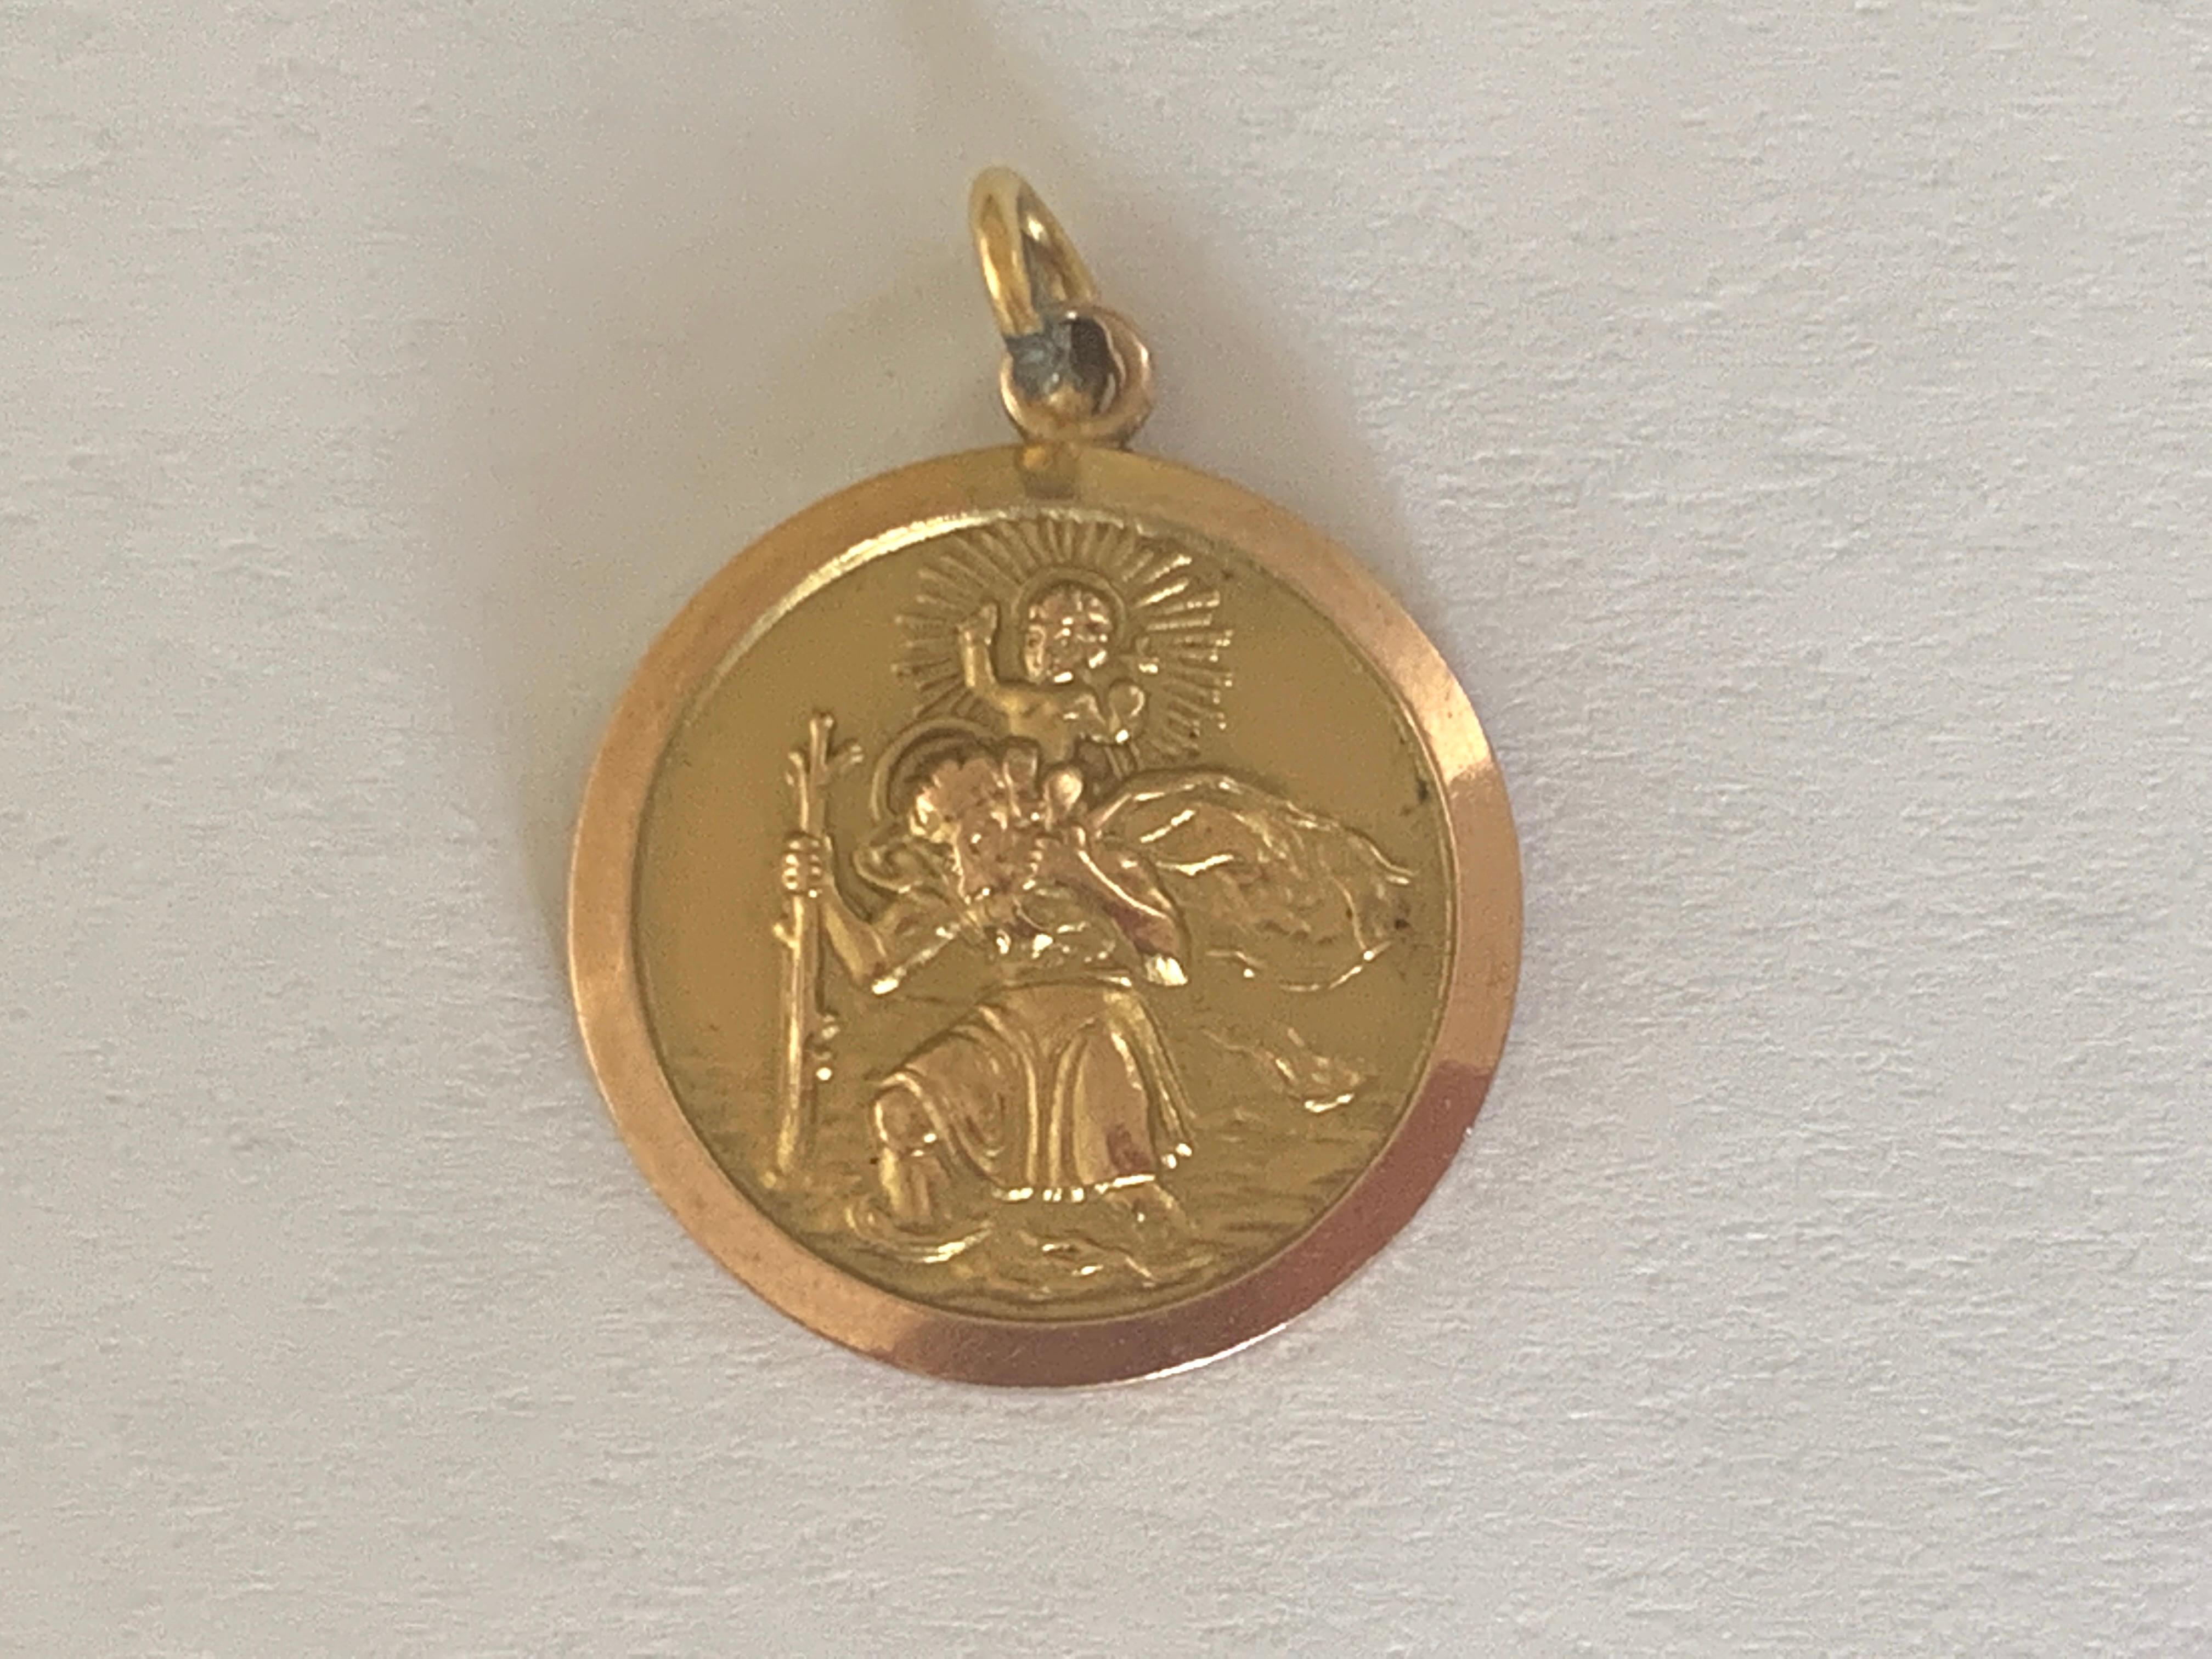 9ct 375 Gold
St.Christopher's religious Pendant

Size 18mm Diameter

Weight 3.42 grams

Fully Hallmarked date Letter 